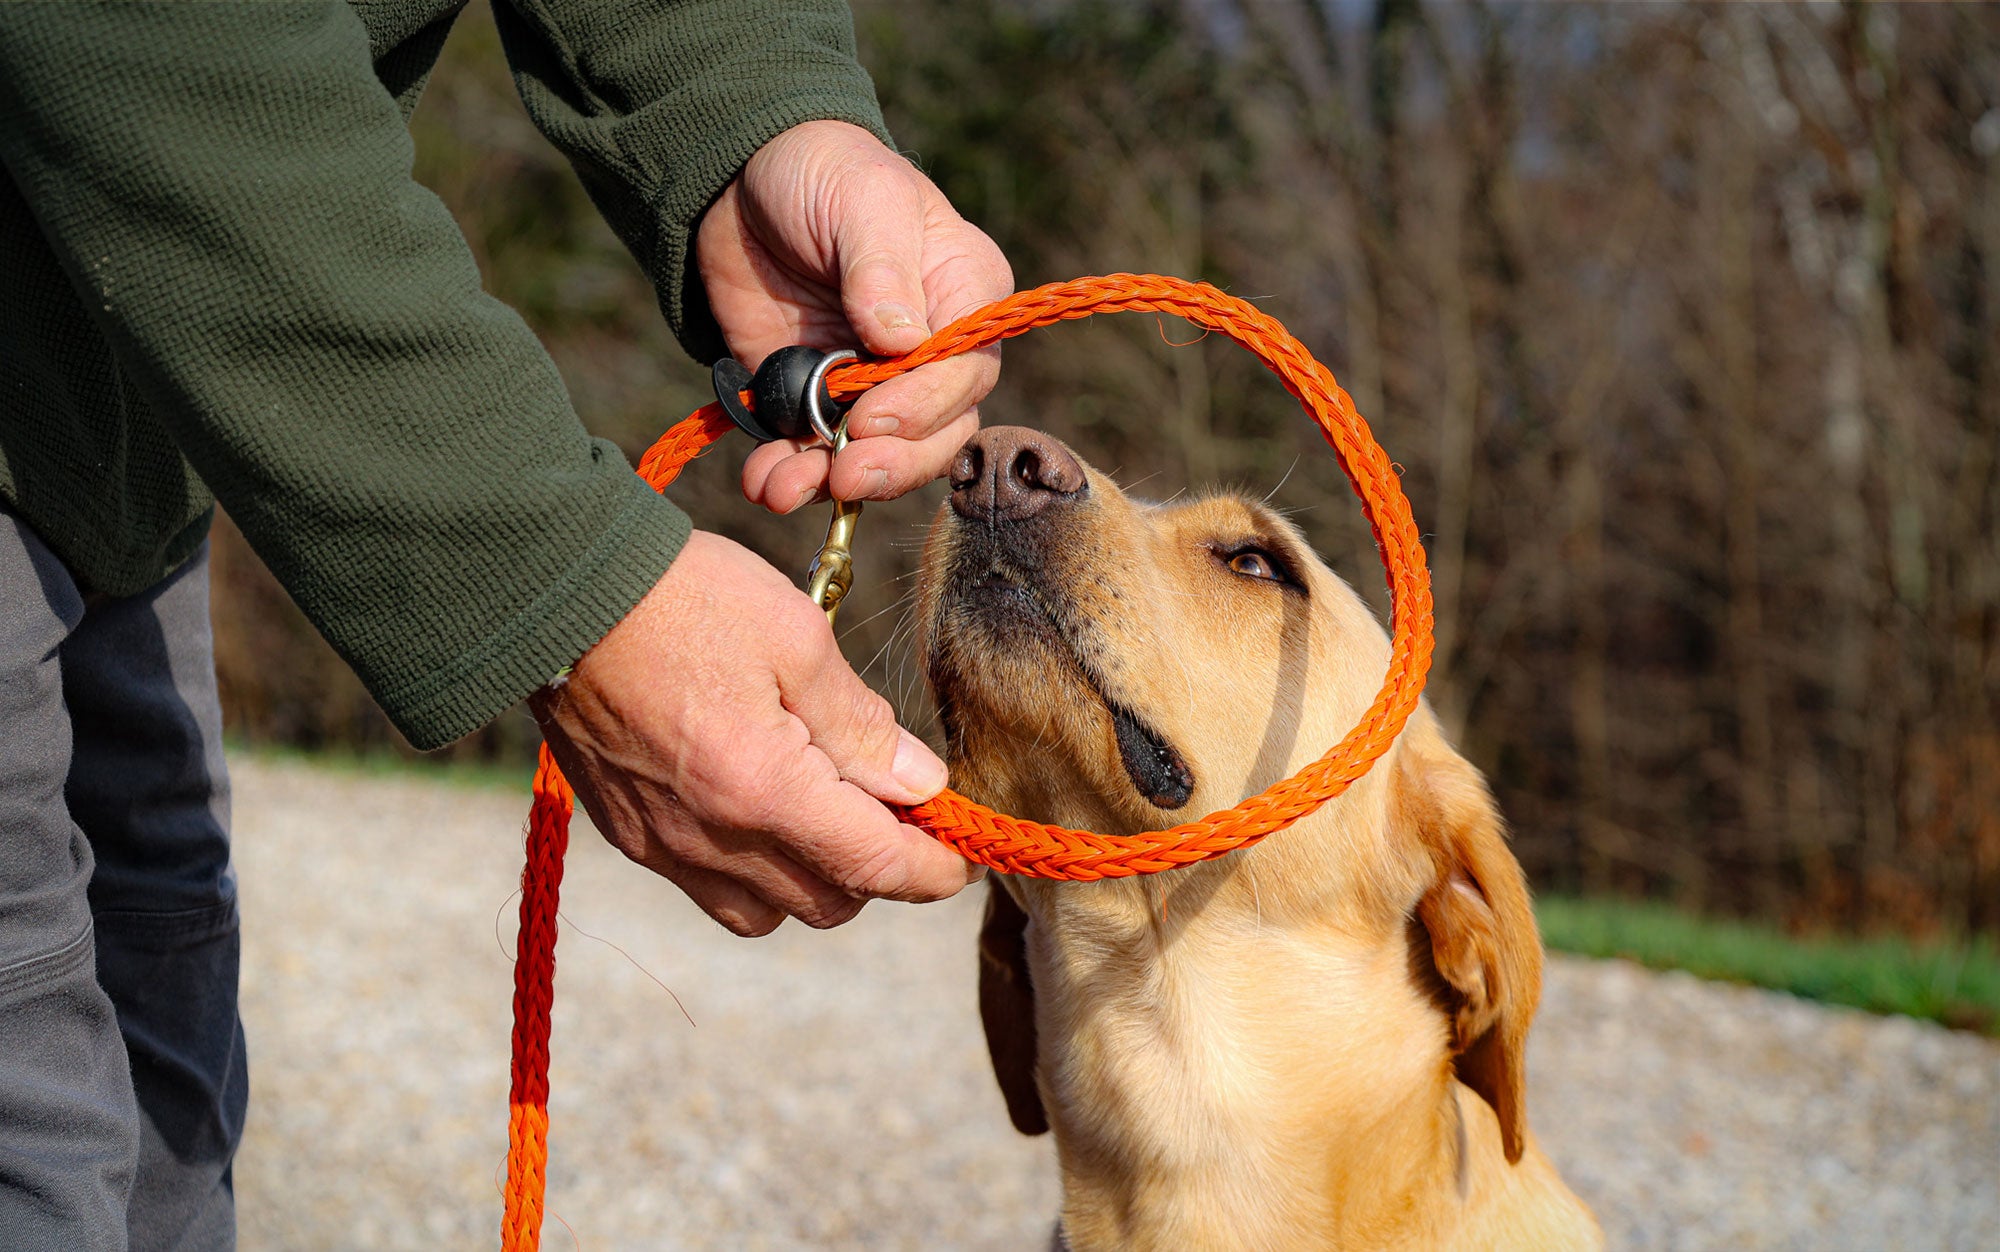 The Dokken Pro6 is a perfect system for us: the lead looks like a regular leash but it provides additional control and opportunities for corrections when needed.